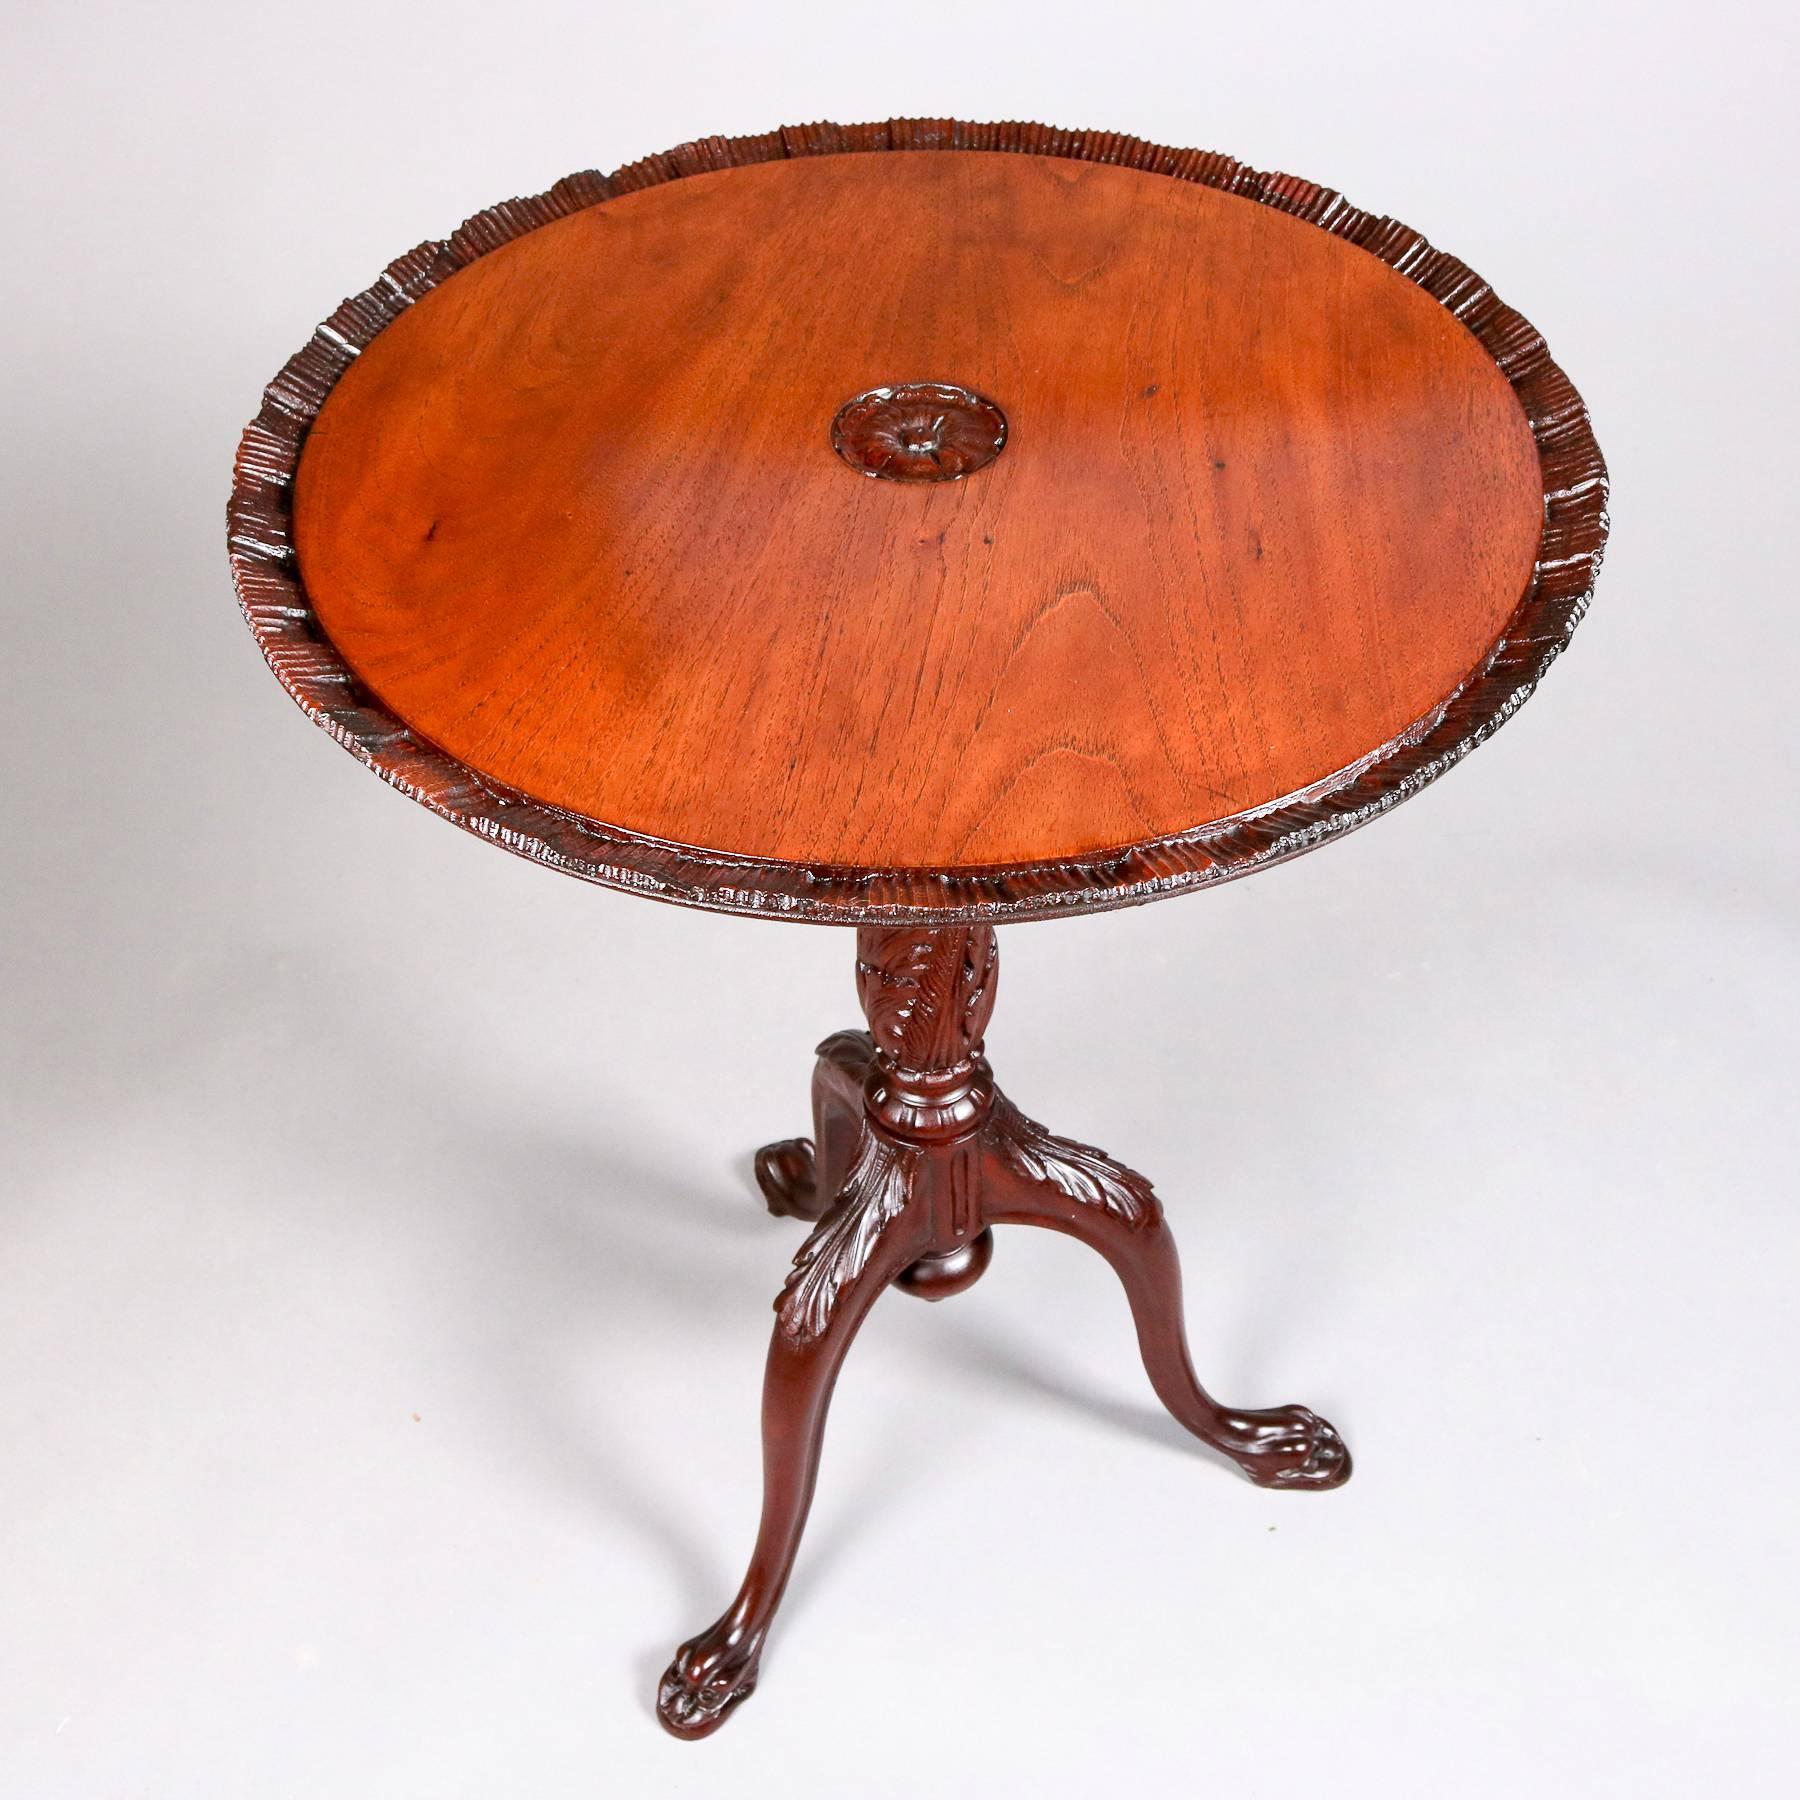 Hand-Carved Antique Carved Mahogany Figural Tilt Top Pie Crust Table with Acanthus